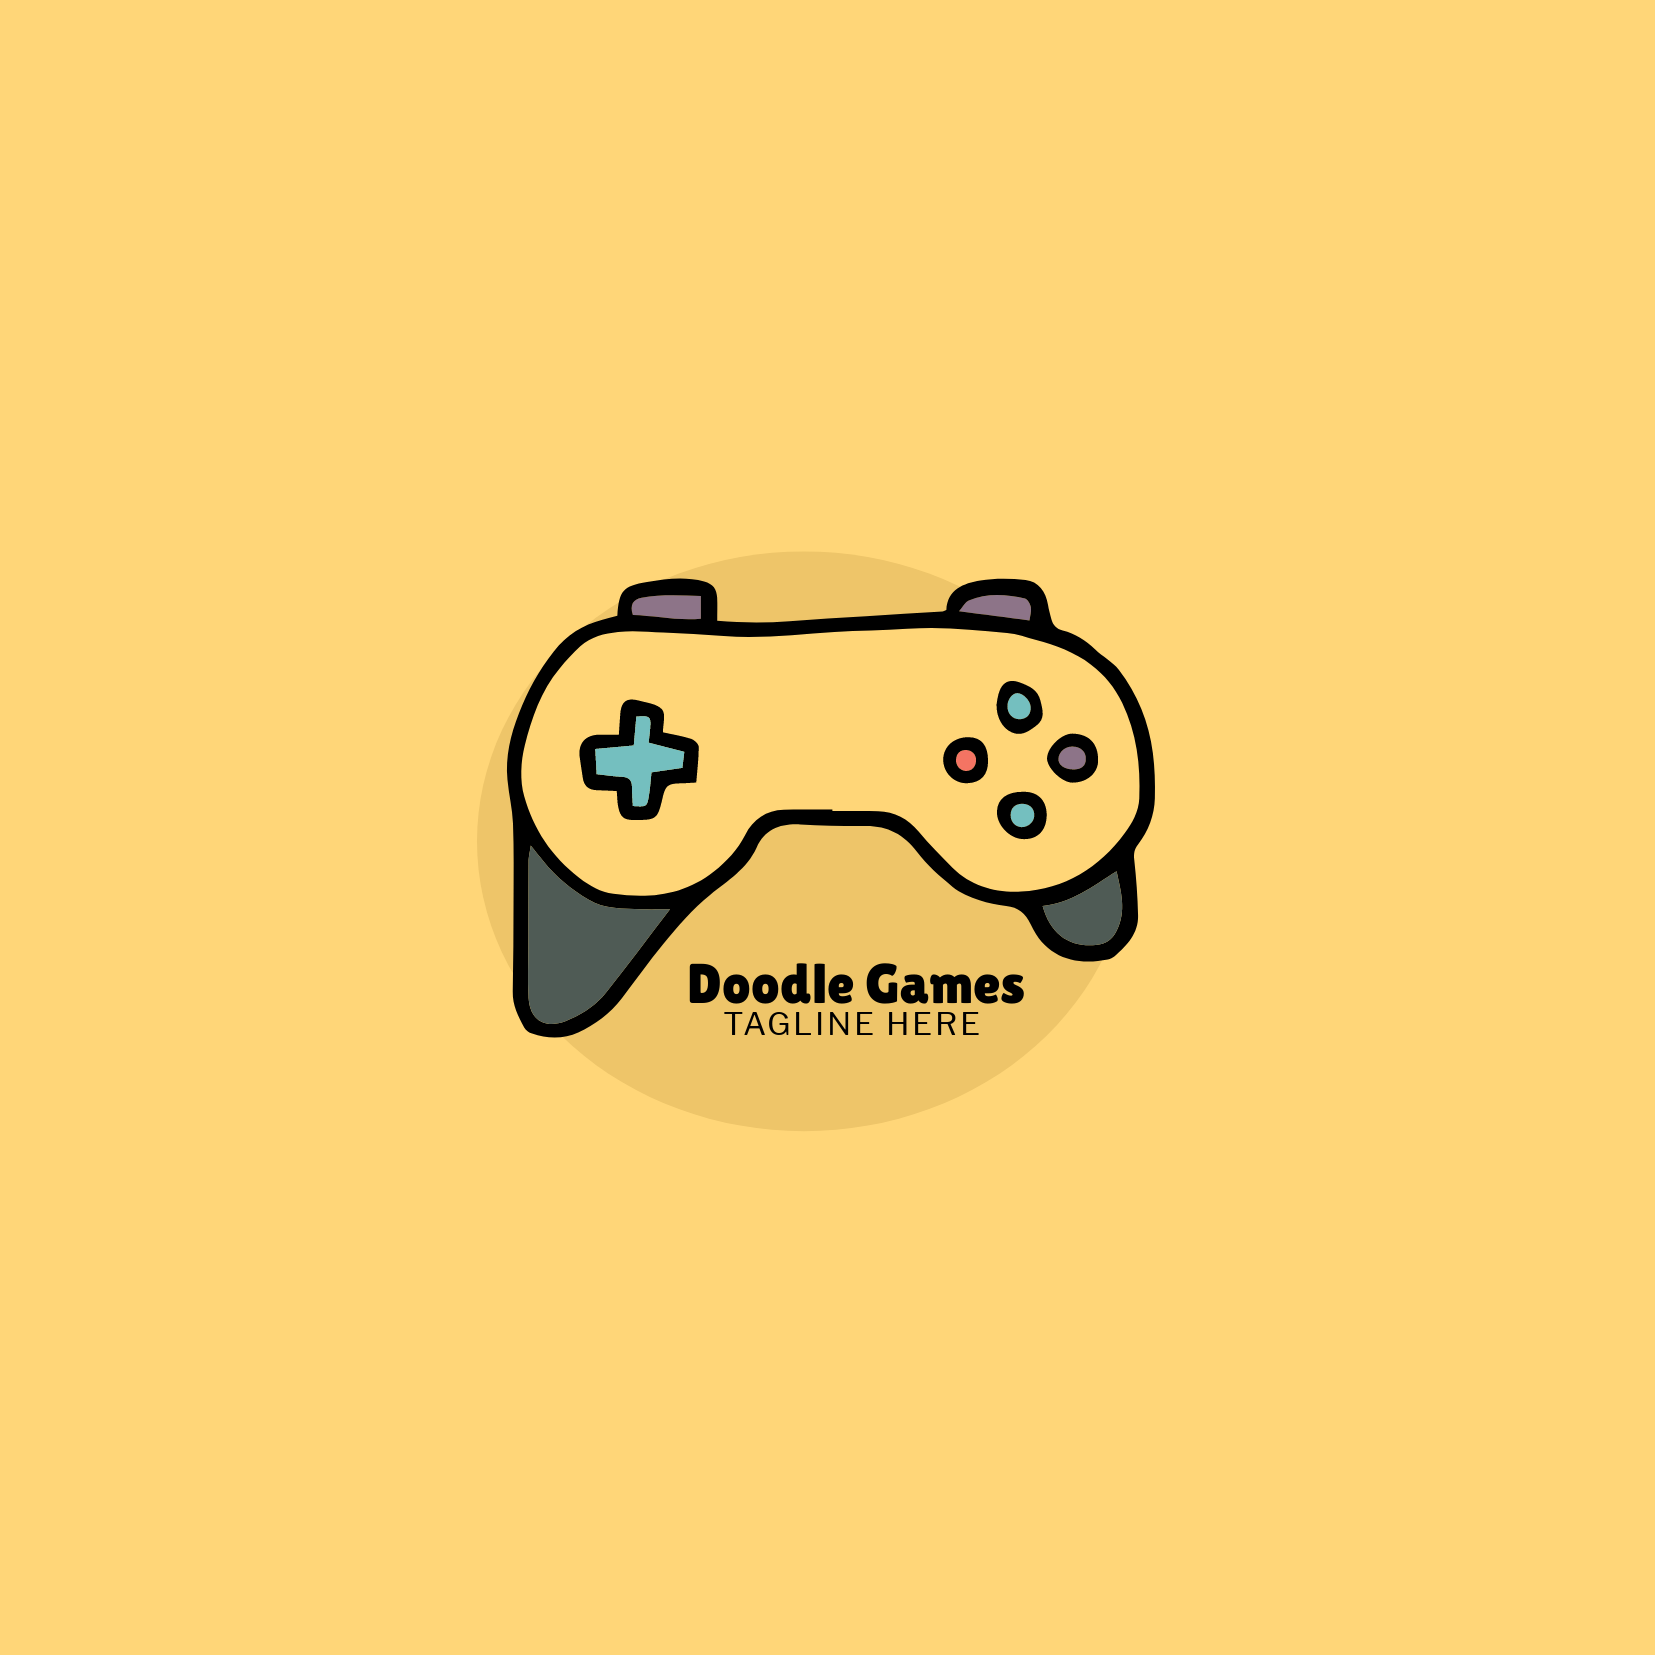 Colourful PS1 gamepad on yellow background - Lilita 1 and Libre Franklin are a great choice of font combinations for relaxing and fun logos - Image